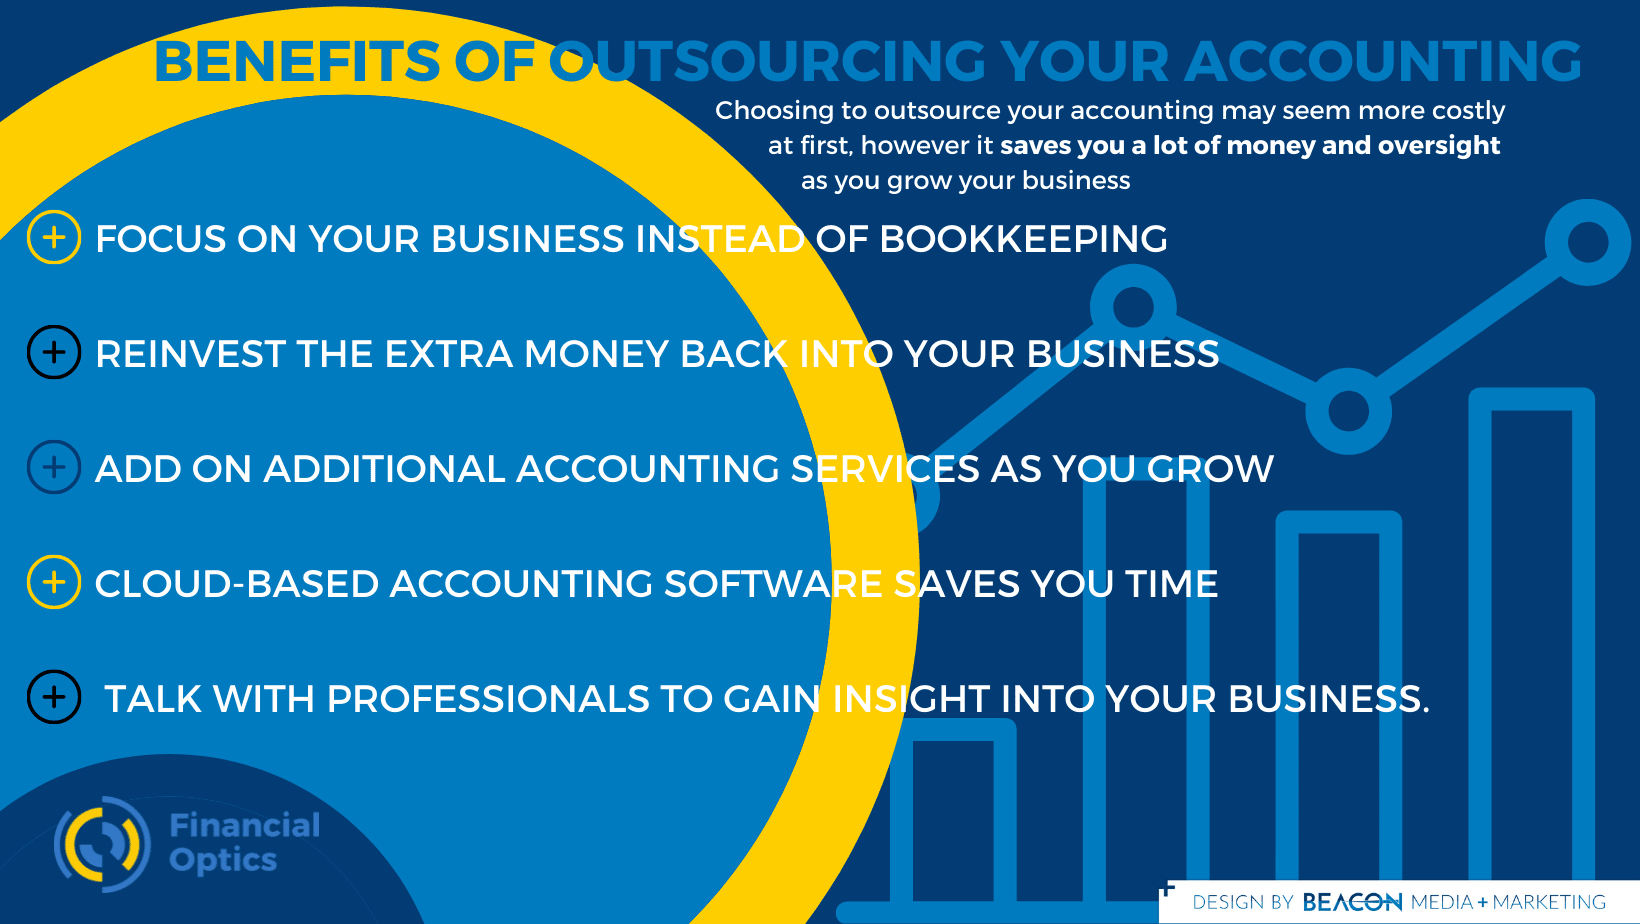 The Benefits of Outsourcing Your Accounting infographic